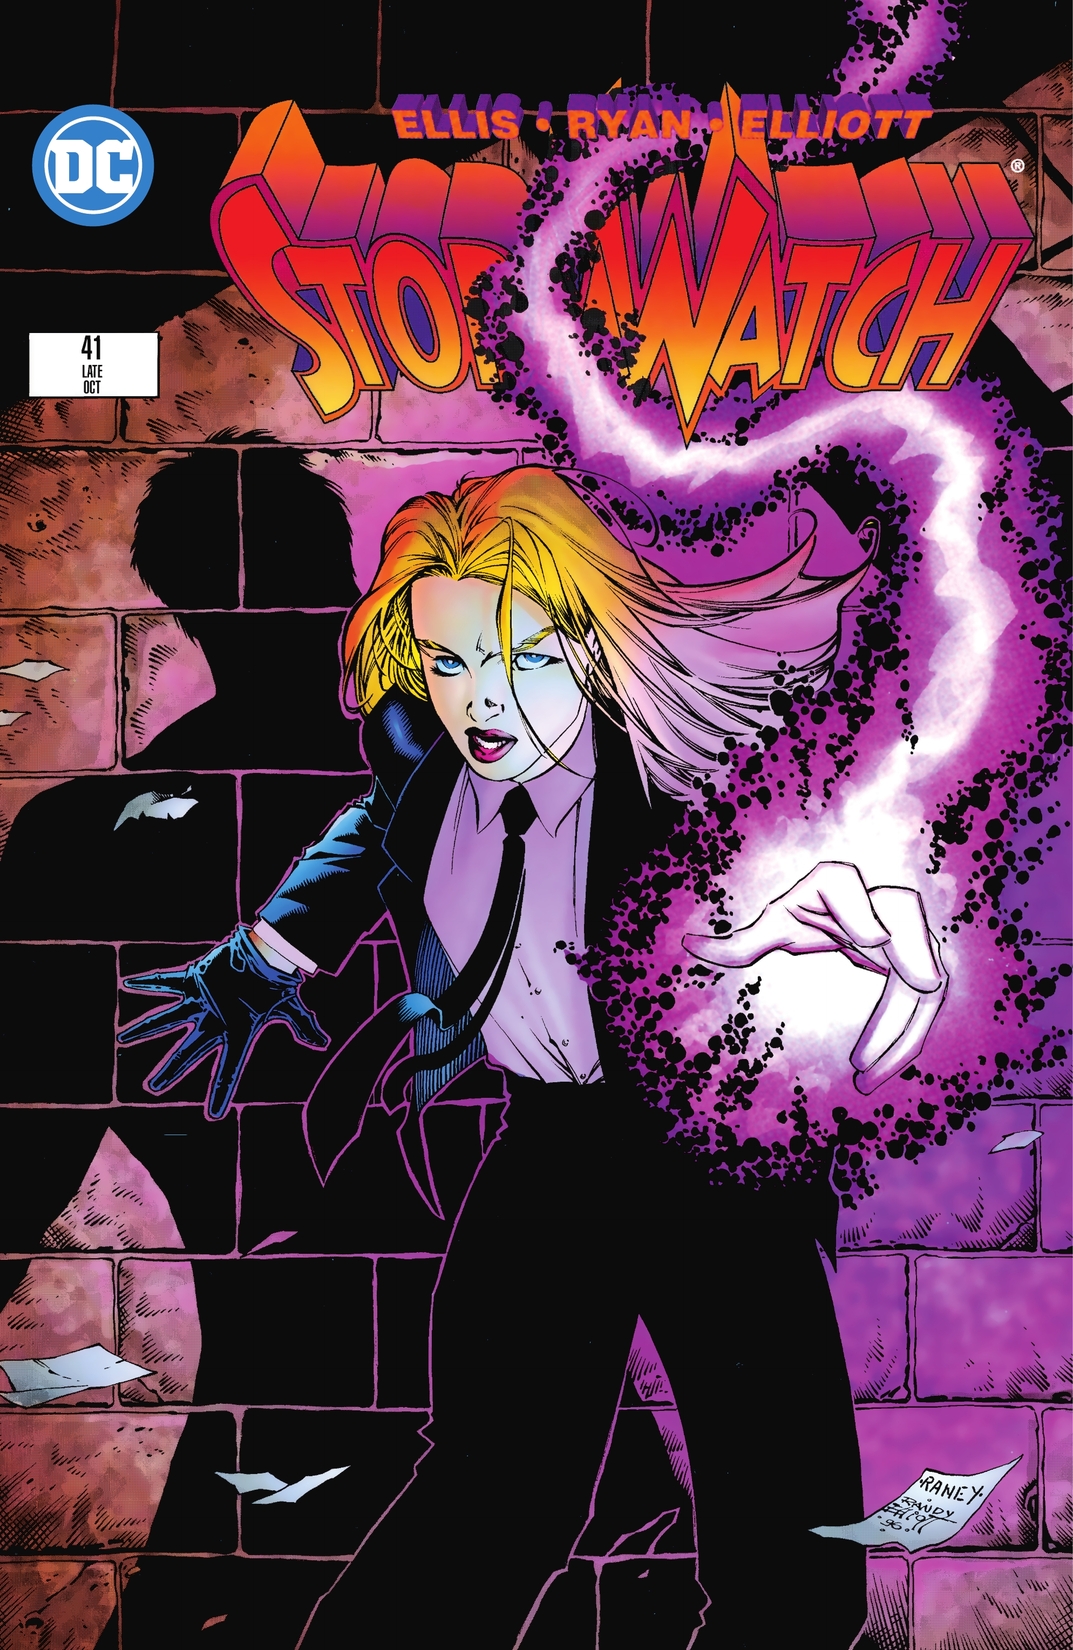 Stormwatch (1993-1997) #41 preview images